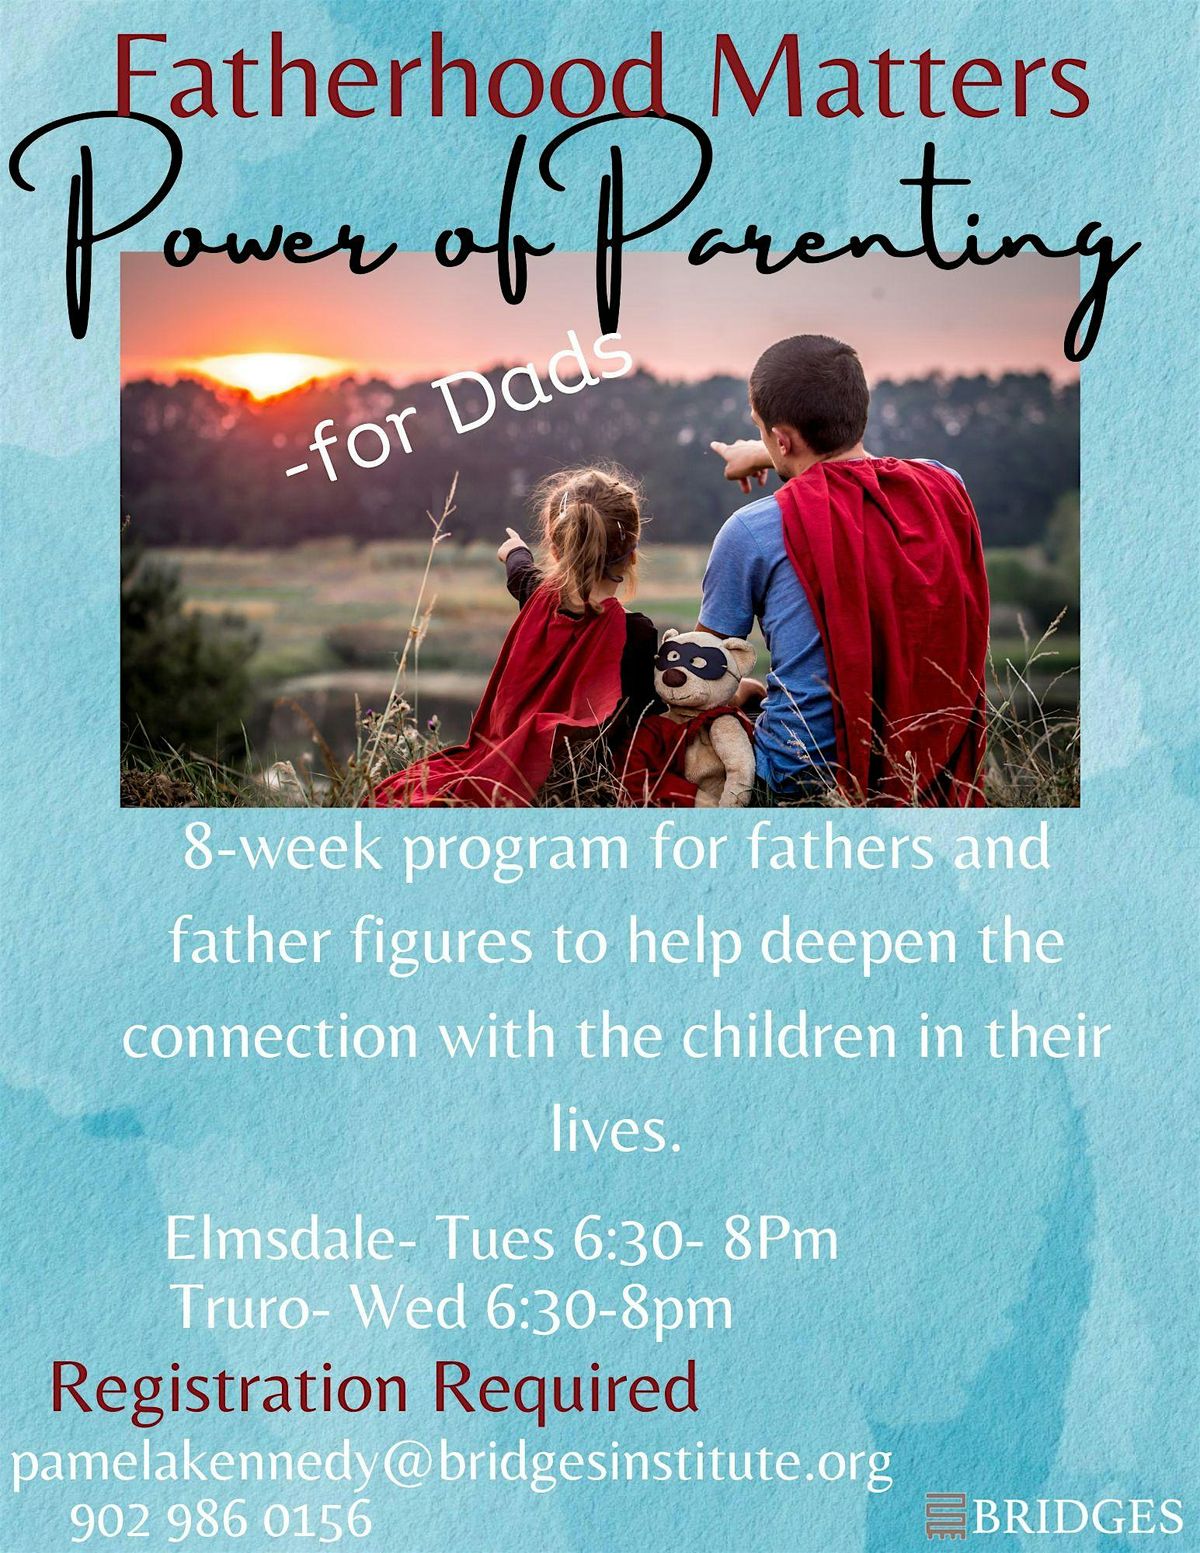 Fatherhood Matters- Power of Parenting for dads